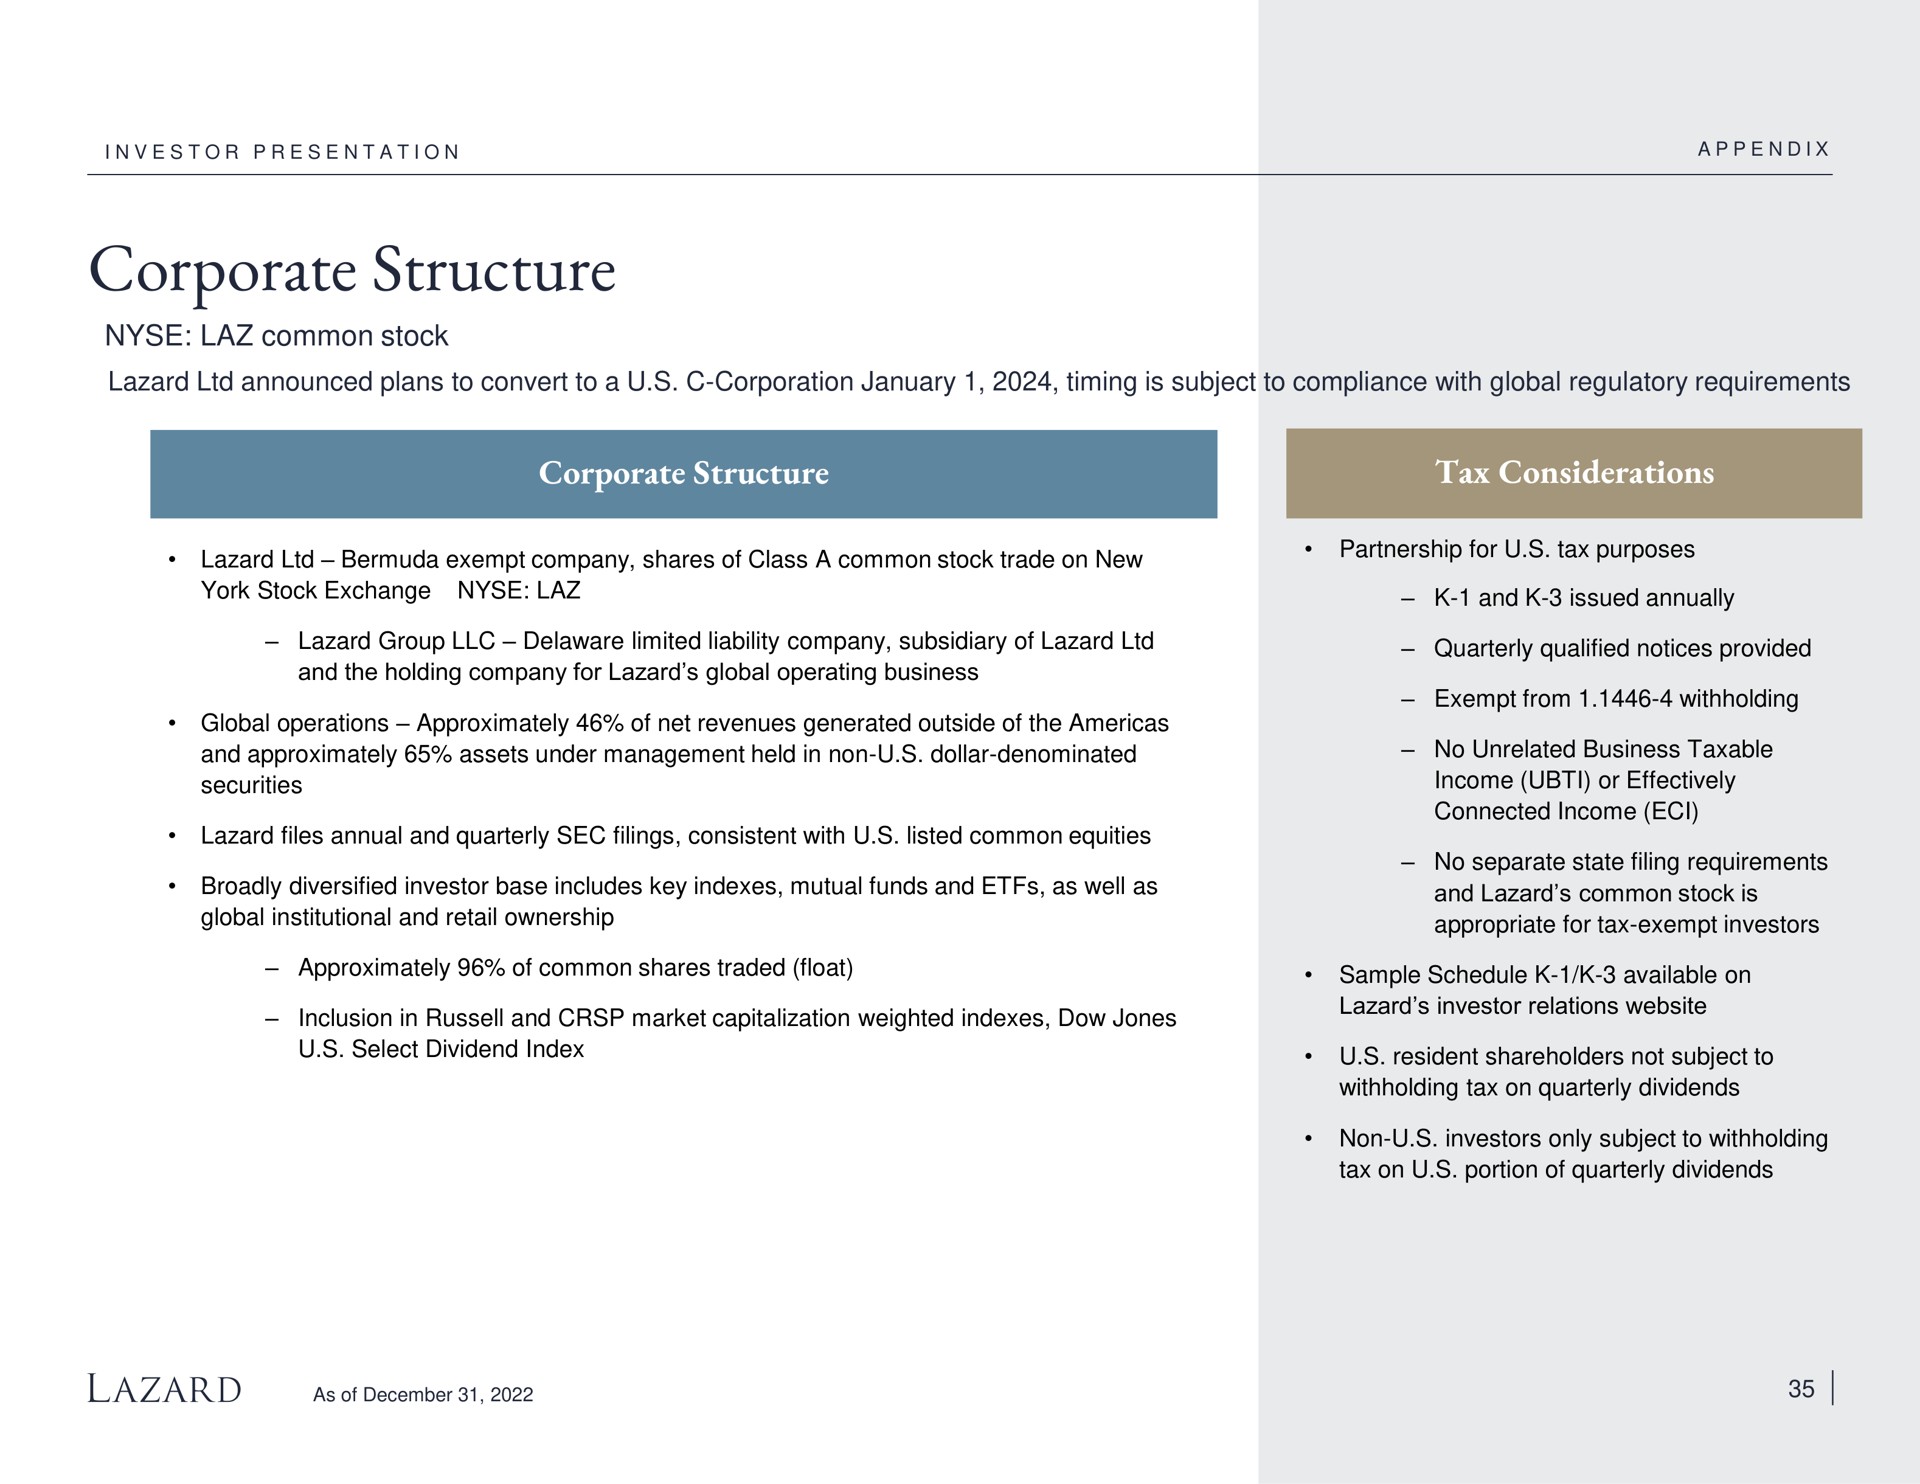 corporate structure corporate structure tax considerations | Lazard